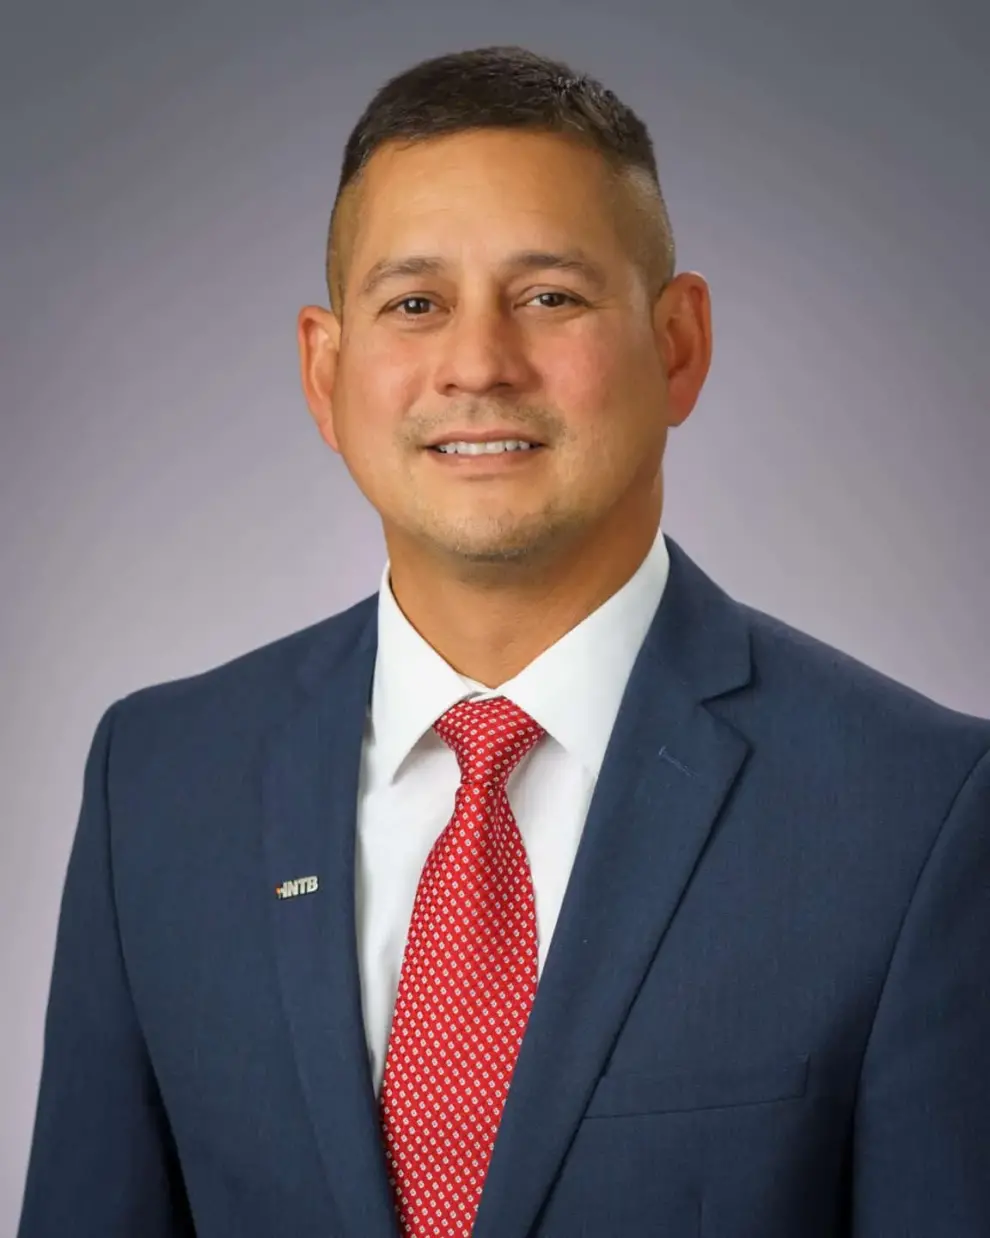 Bobby Lewis joins HNTB as vice president in new national Advisory practice